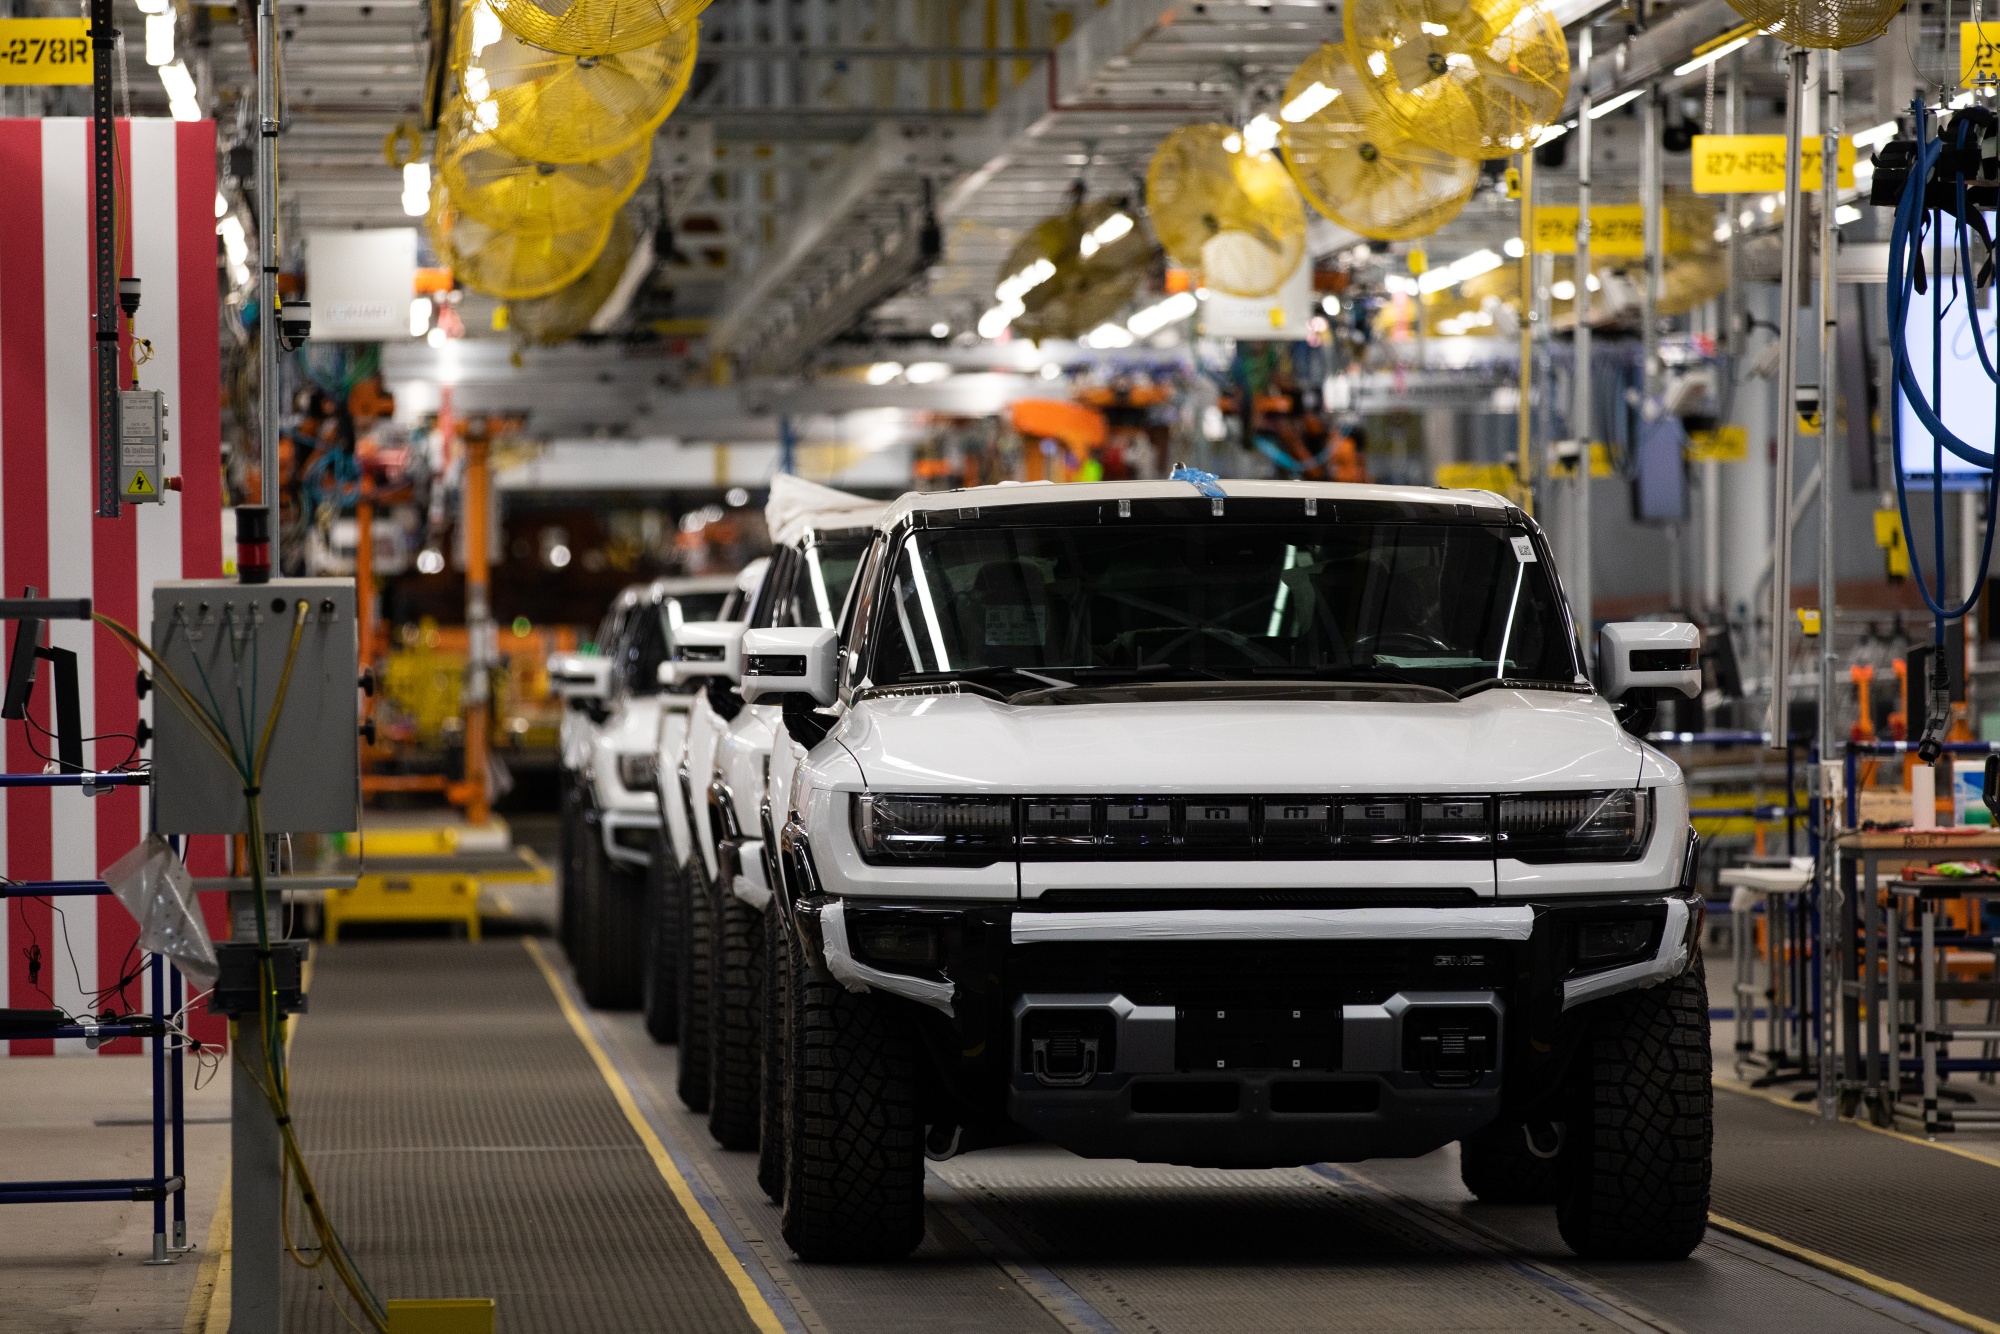 GMC Hummer electric vehicles on the production line at General Motors' assembly plant in Detroit, Michigan.